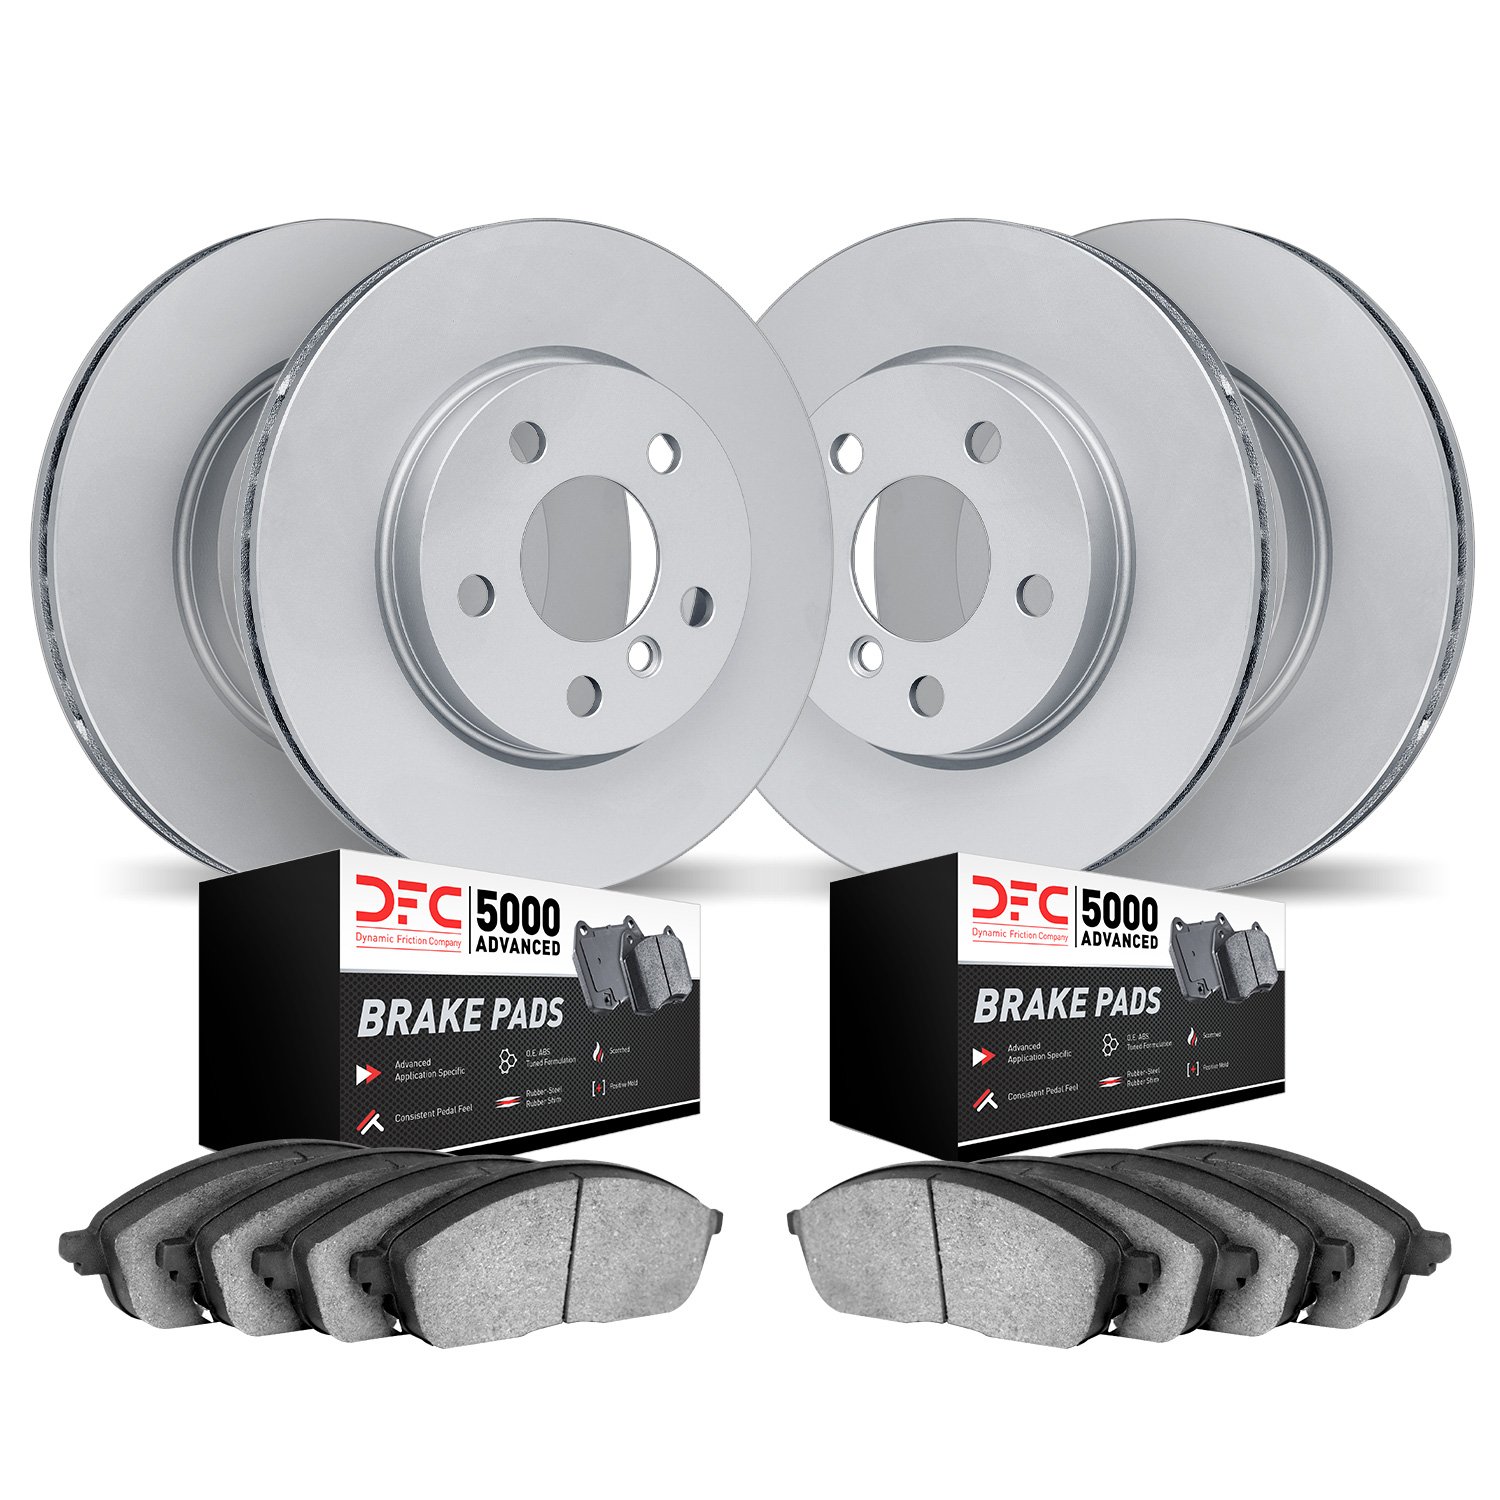 9504-02032 GEOMET Brake Rotors w/5000 Advanced Brake Pads Kit, Fits Select Porsche, Position: Front and Rear